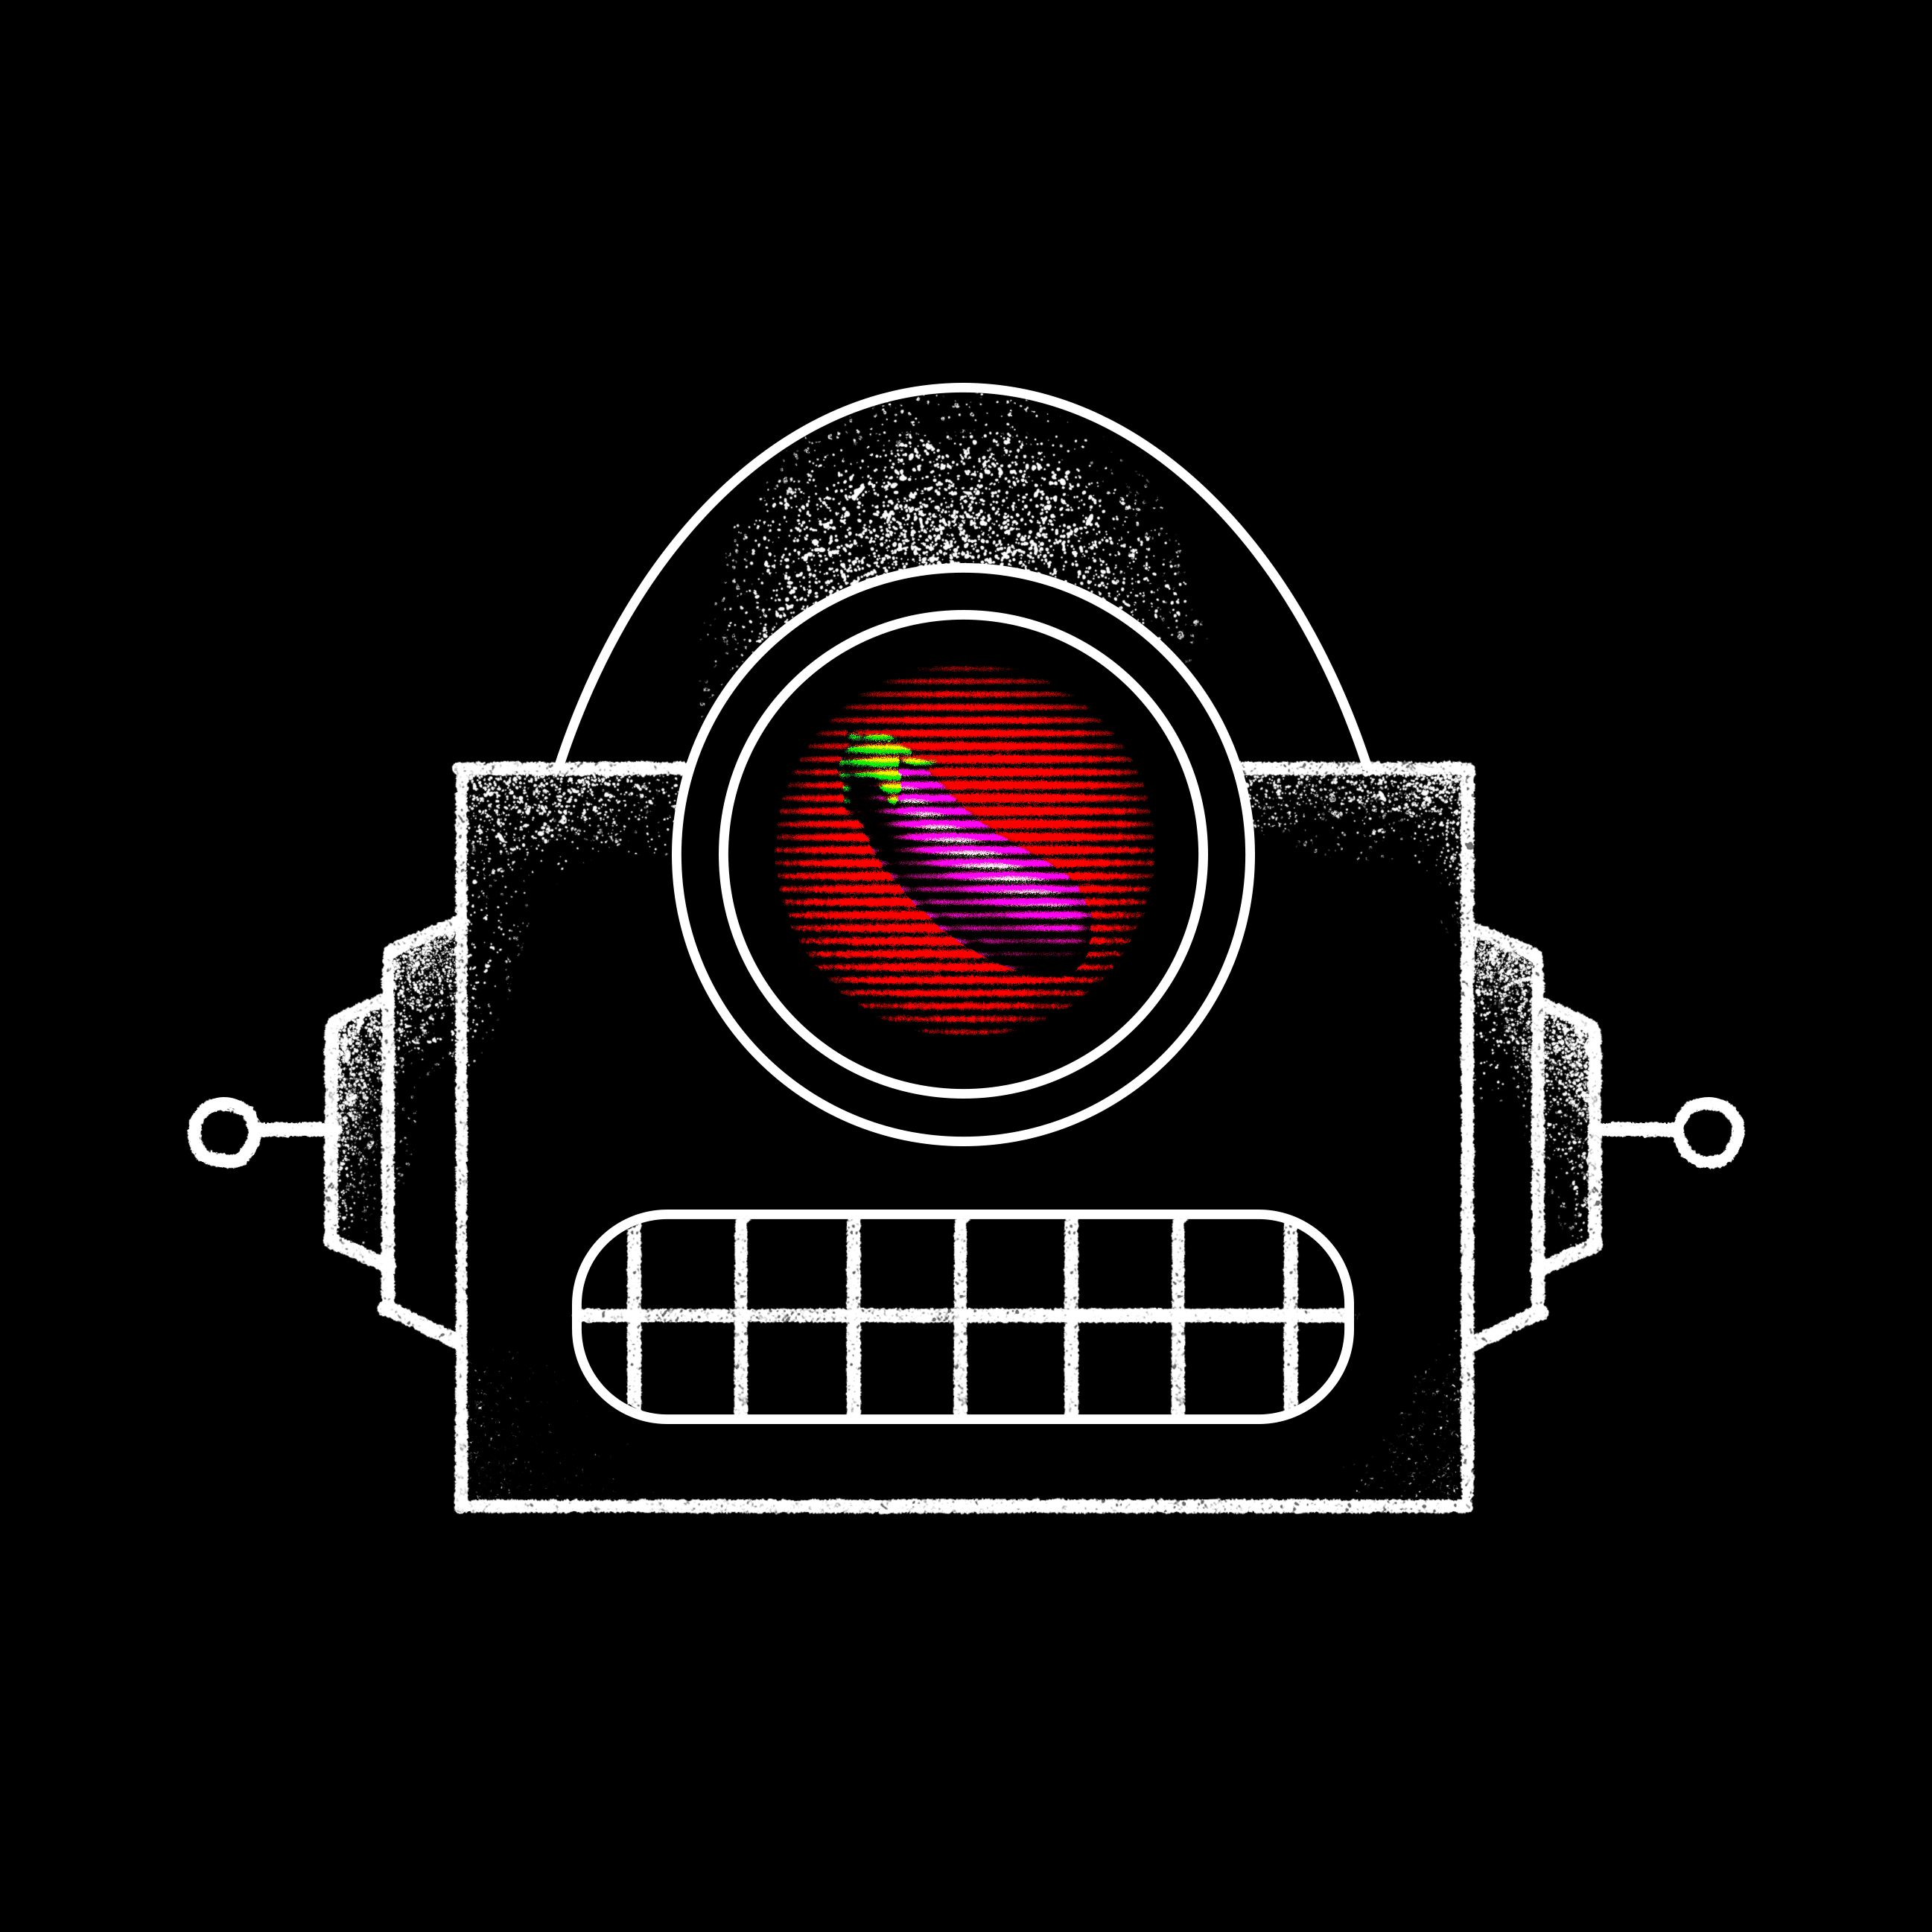 Illustration of a robot head with a color shifting emoji of an eggplant on its eye lens.